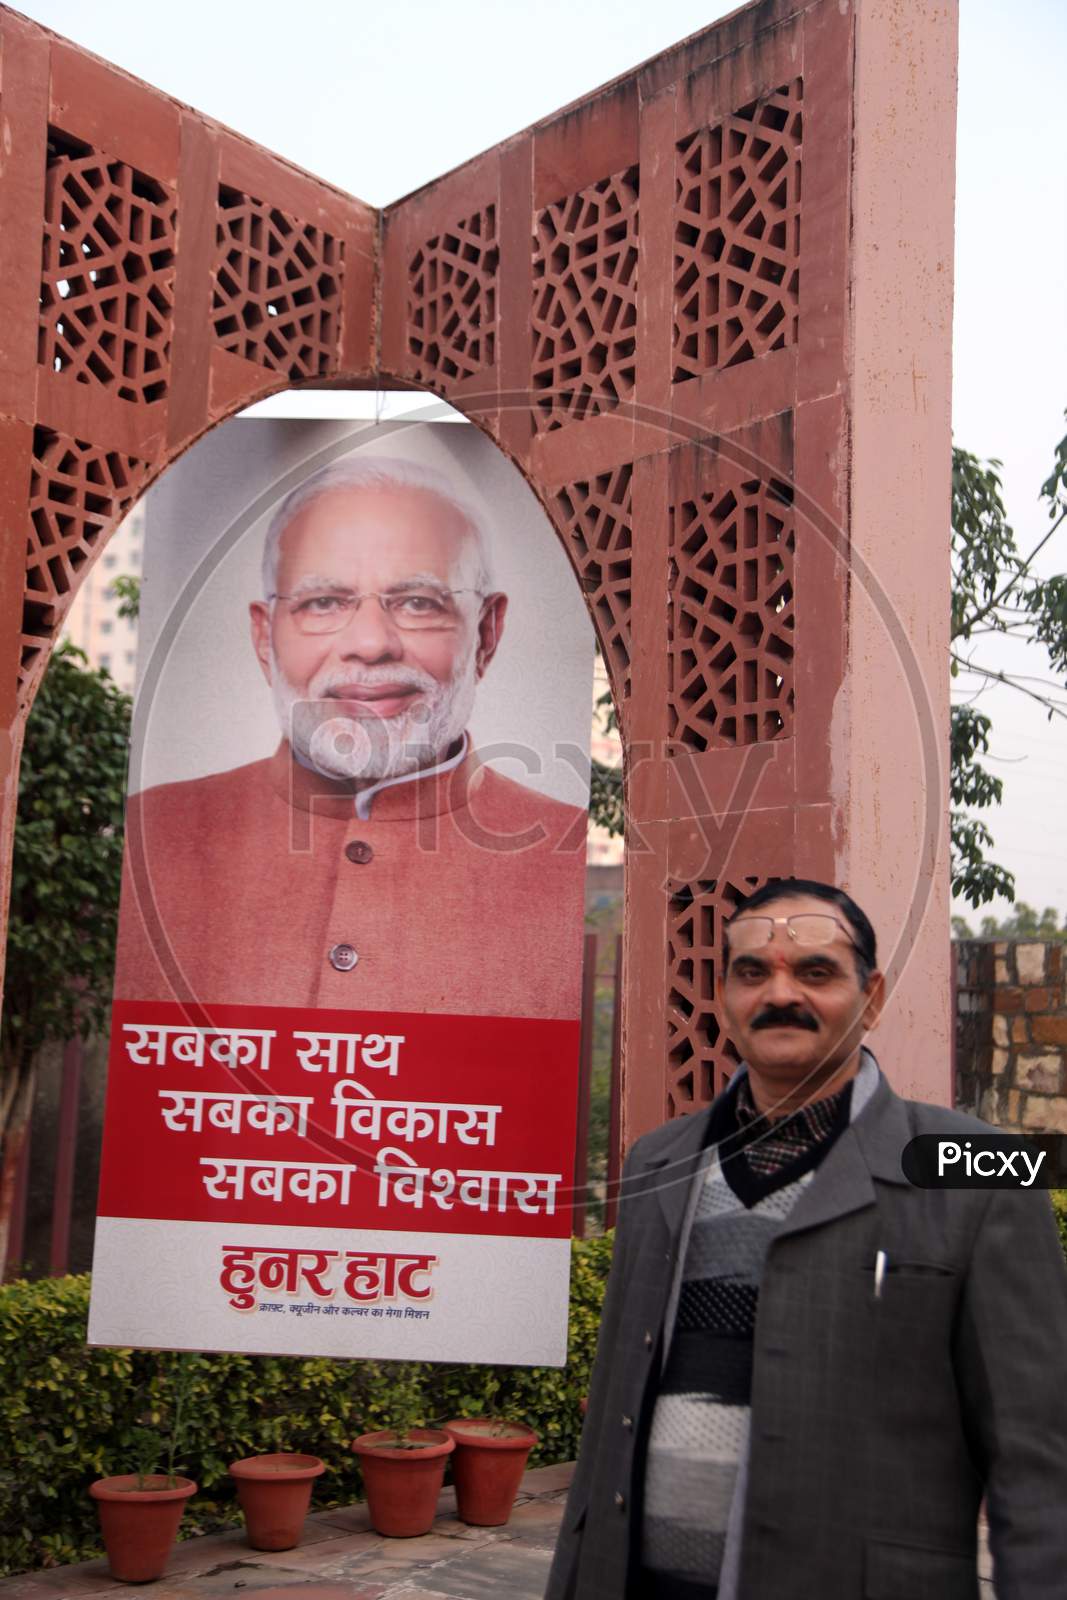 A Middle-Aged Indian Man with Shri Narendra Modi Poster